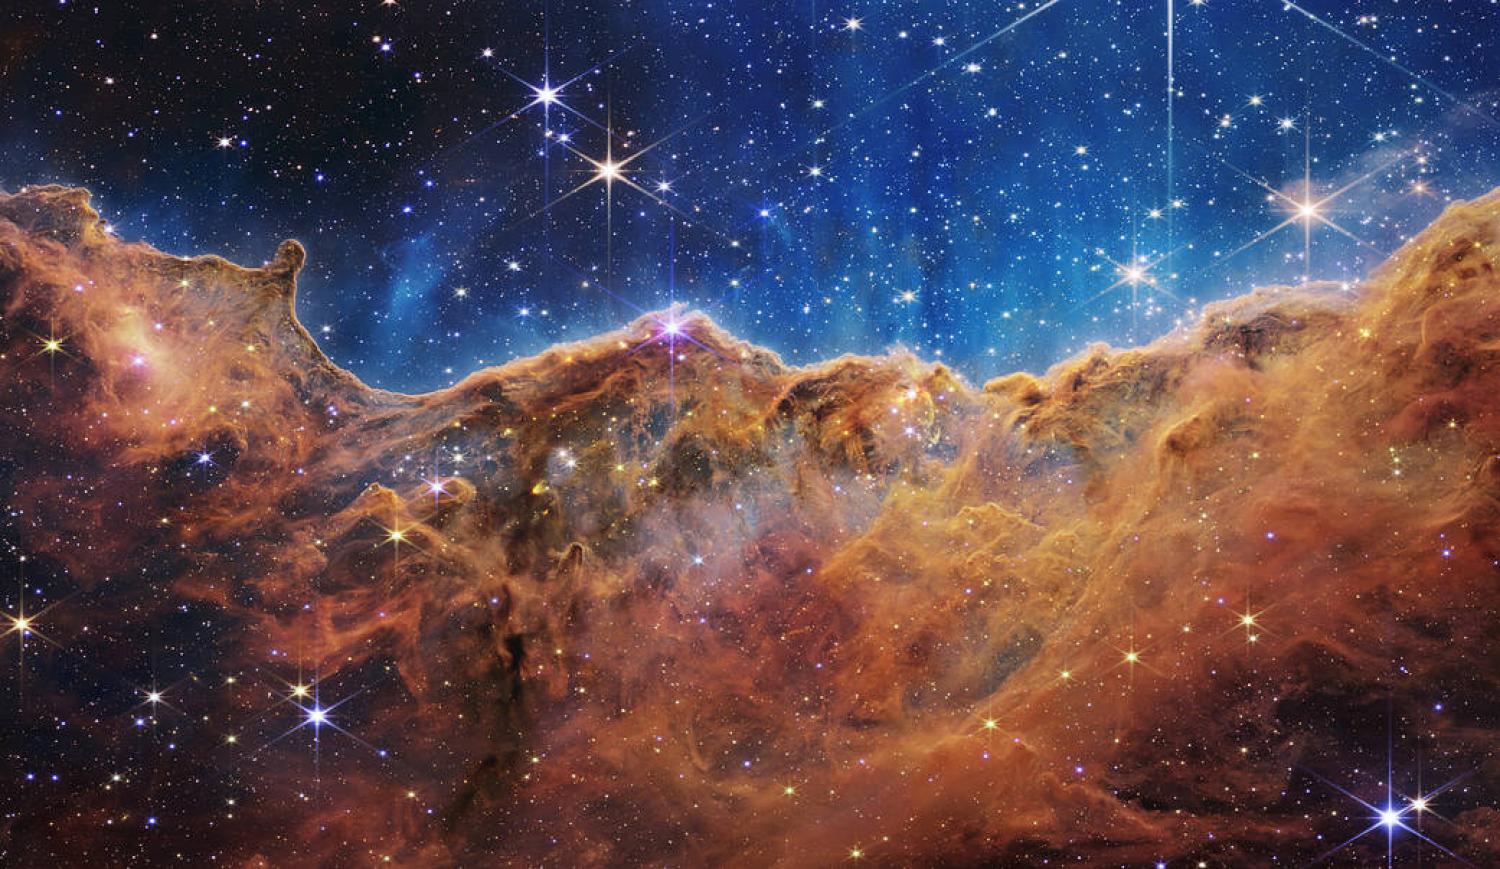 Image of clouds of interstellar gas and dust in the Carina Nebula